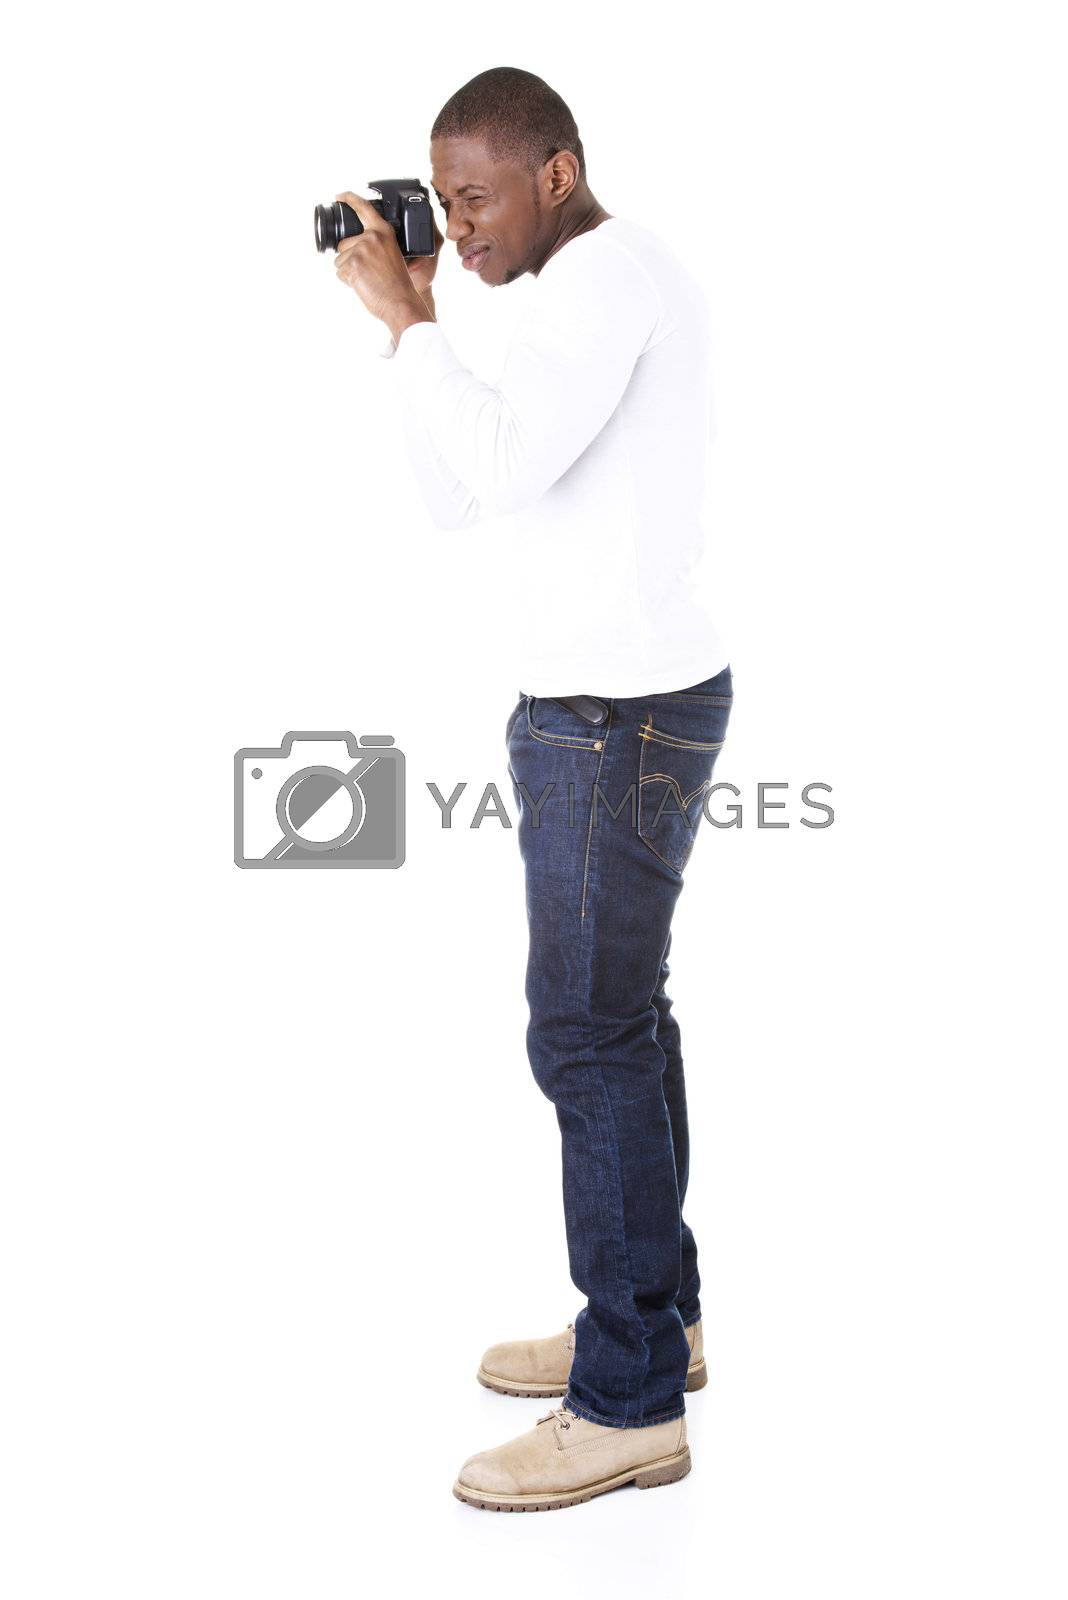 Royalty free image of Photographer at work by BDS